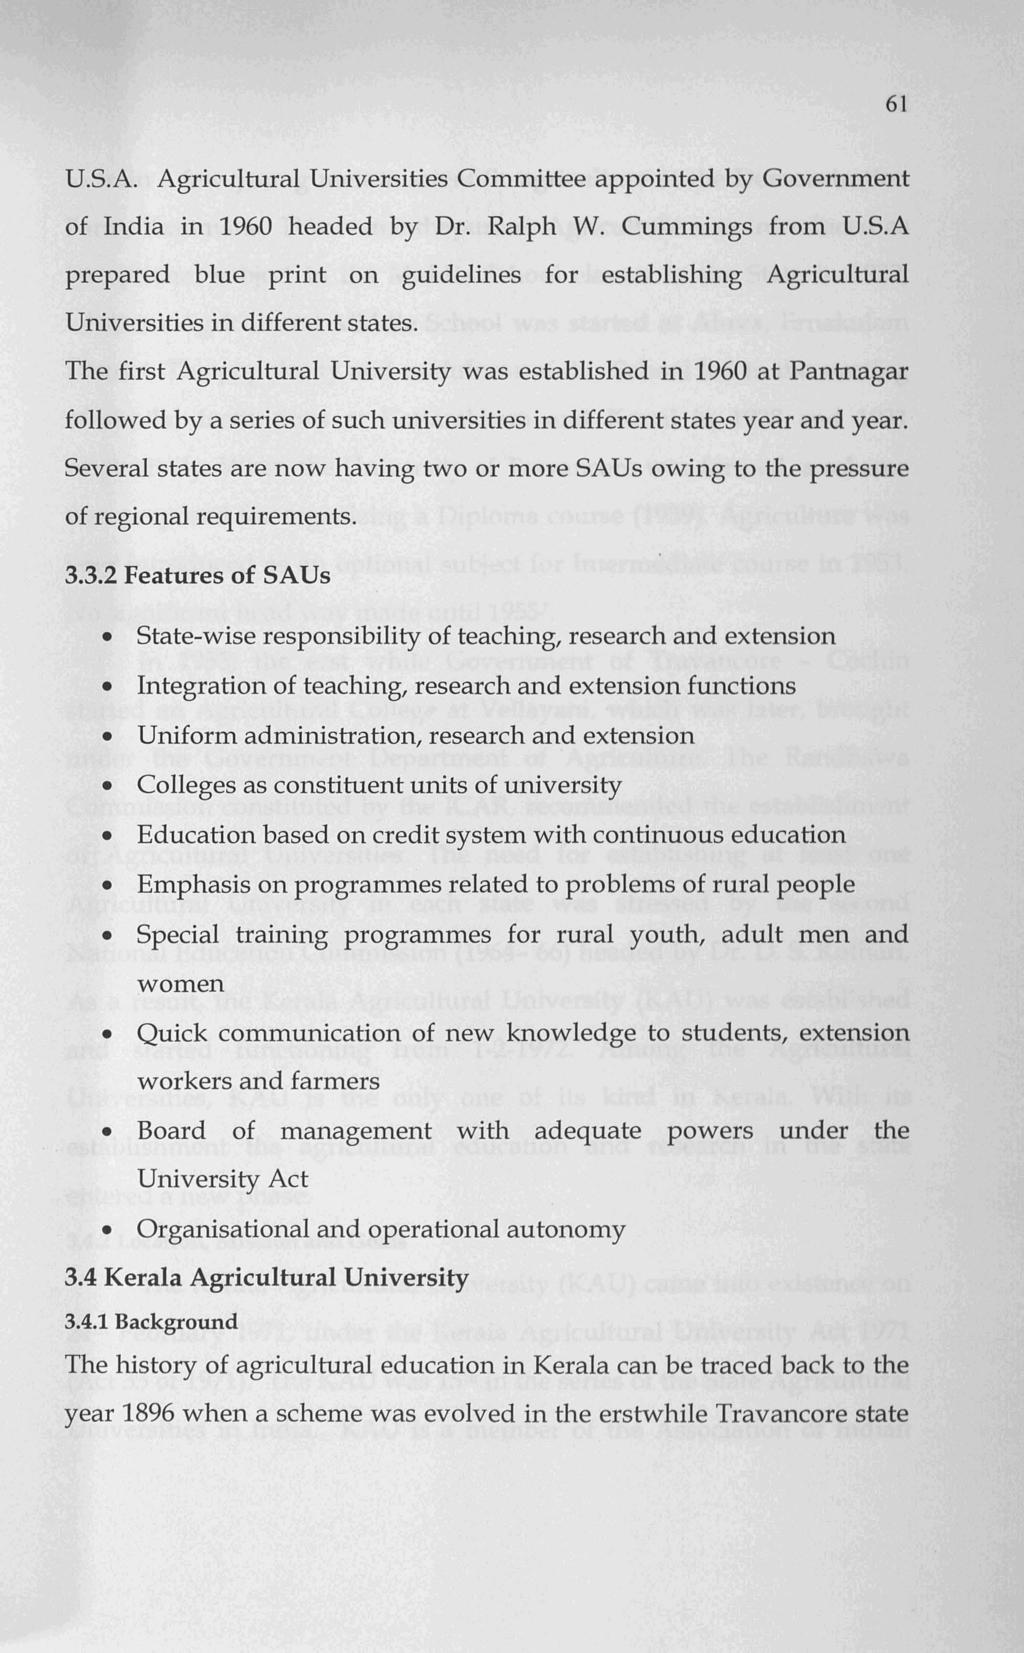 61 U.S.A. Agricultural Universities Committee appointed by Government of India in 1960 headed by Dr. Ralph W. Cummings from U.S.A prepared blue print on guidelines for establishing Agricultural Universities in different states.